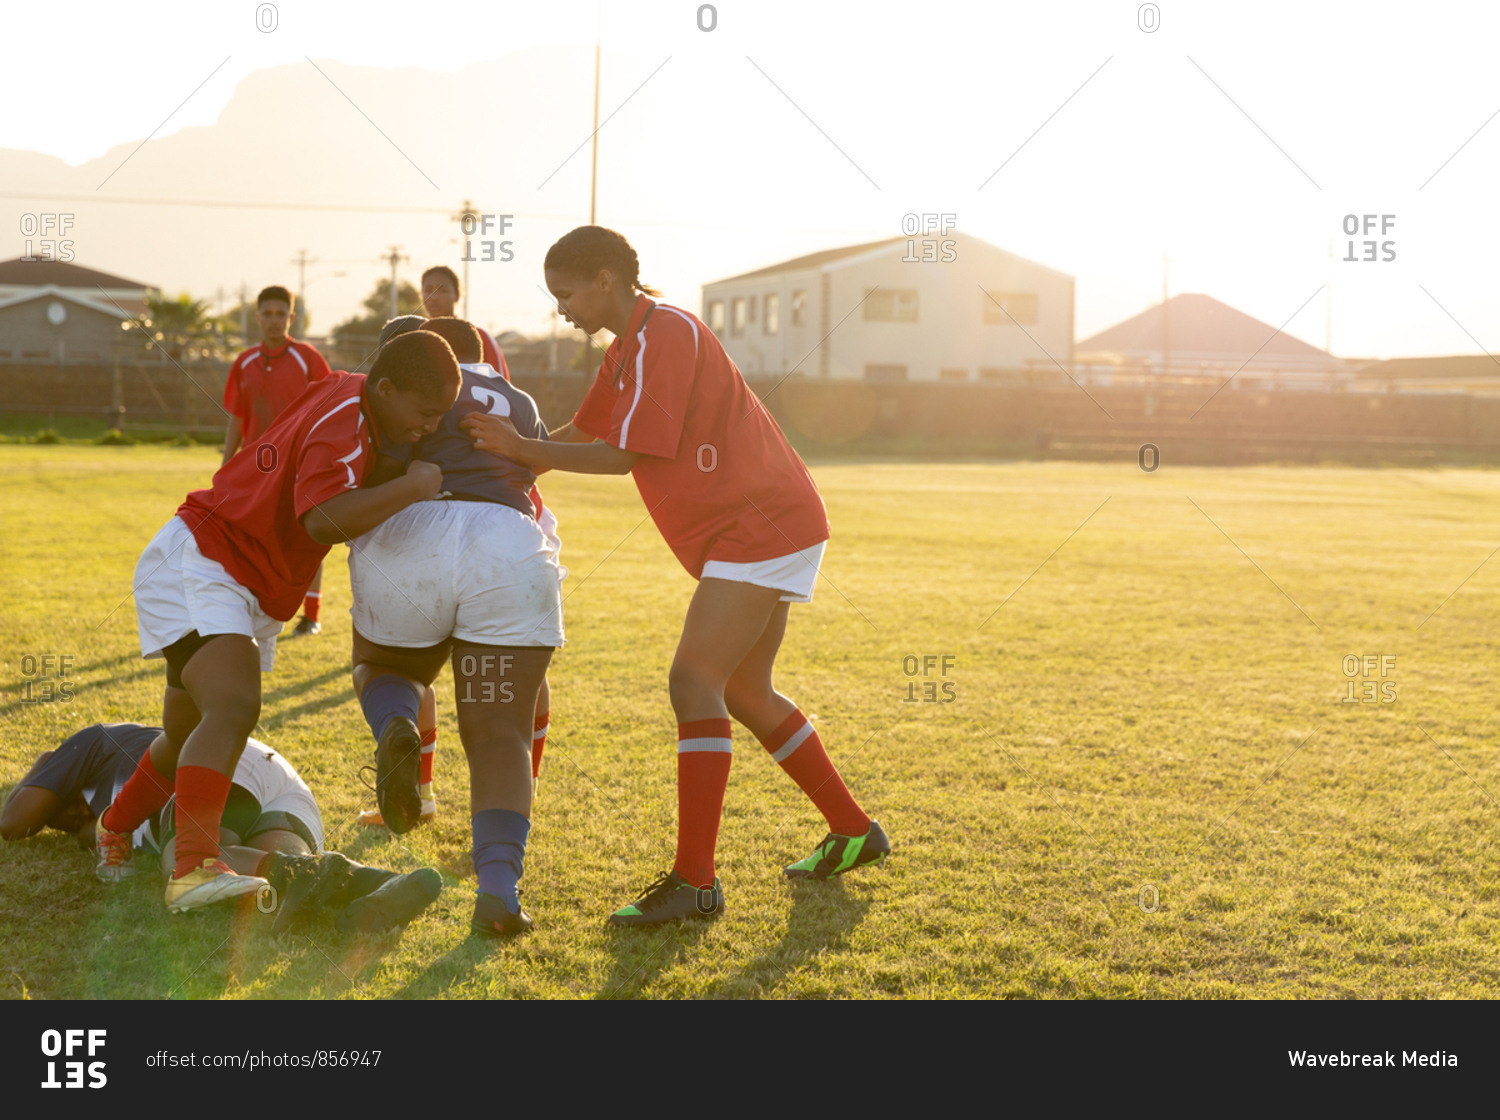 Side view of two young adult mixed race female rugby players tackling a player from the opposing team during a rugby match, with other players in the background and one lying on the ground